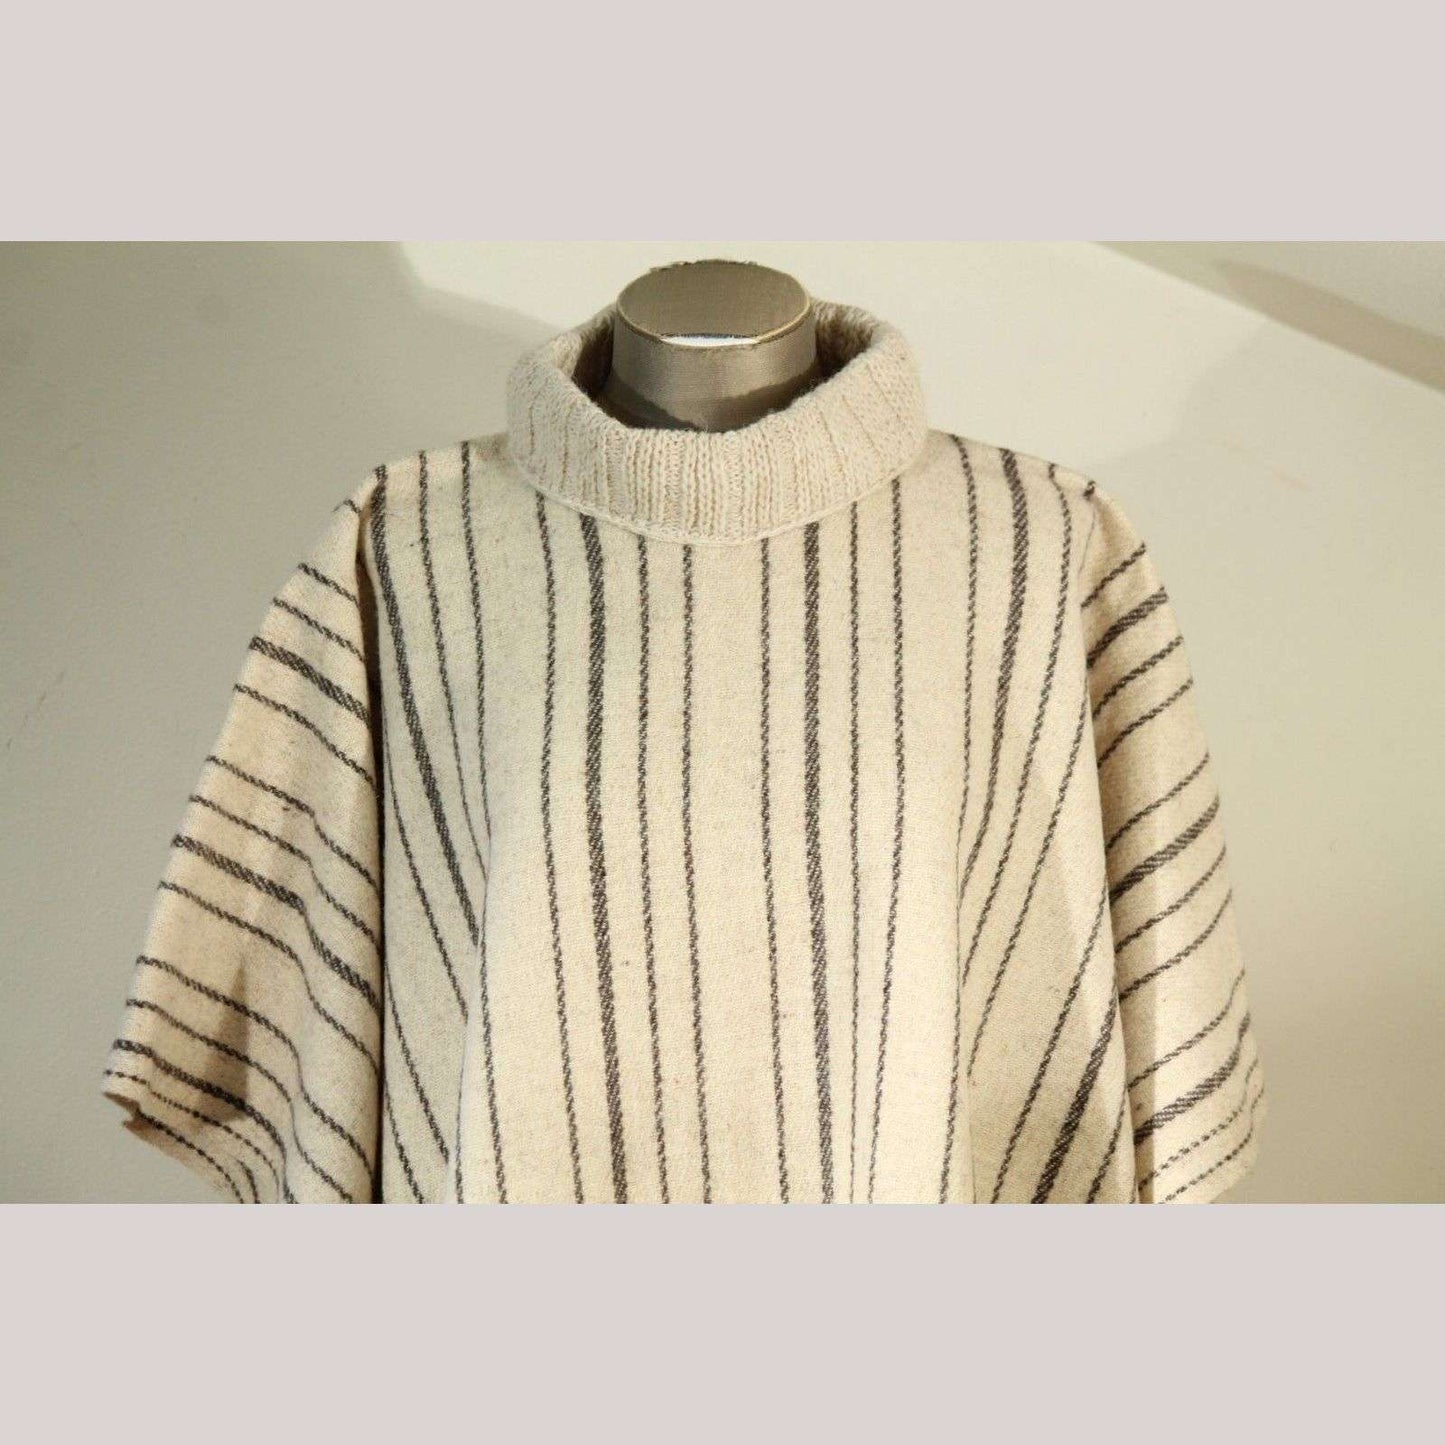 Vintage Mexican Wool Poncho/Serape Unisex Outerwear Ethnic Clothing